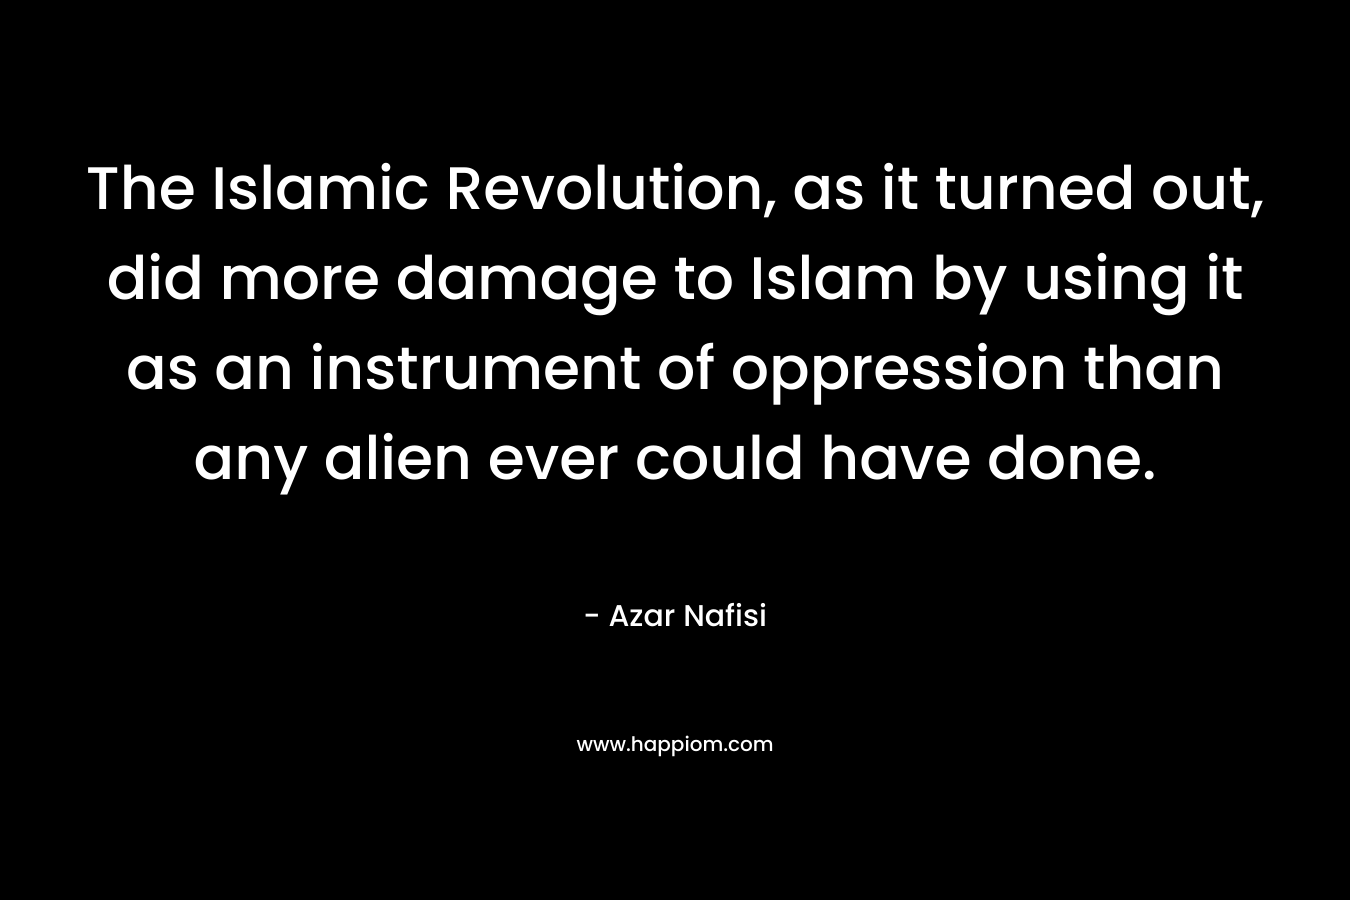 The Islamic Revolution, as it turned out, did more damage to Islam by using it as an instrument of oppression than any alien ever could have done.